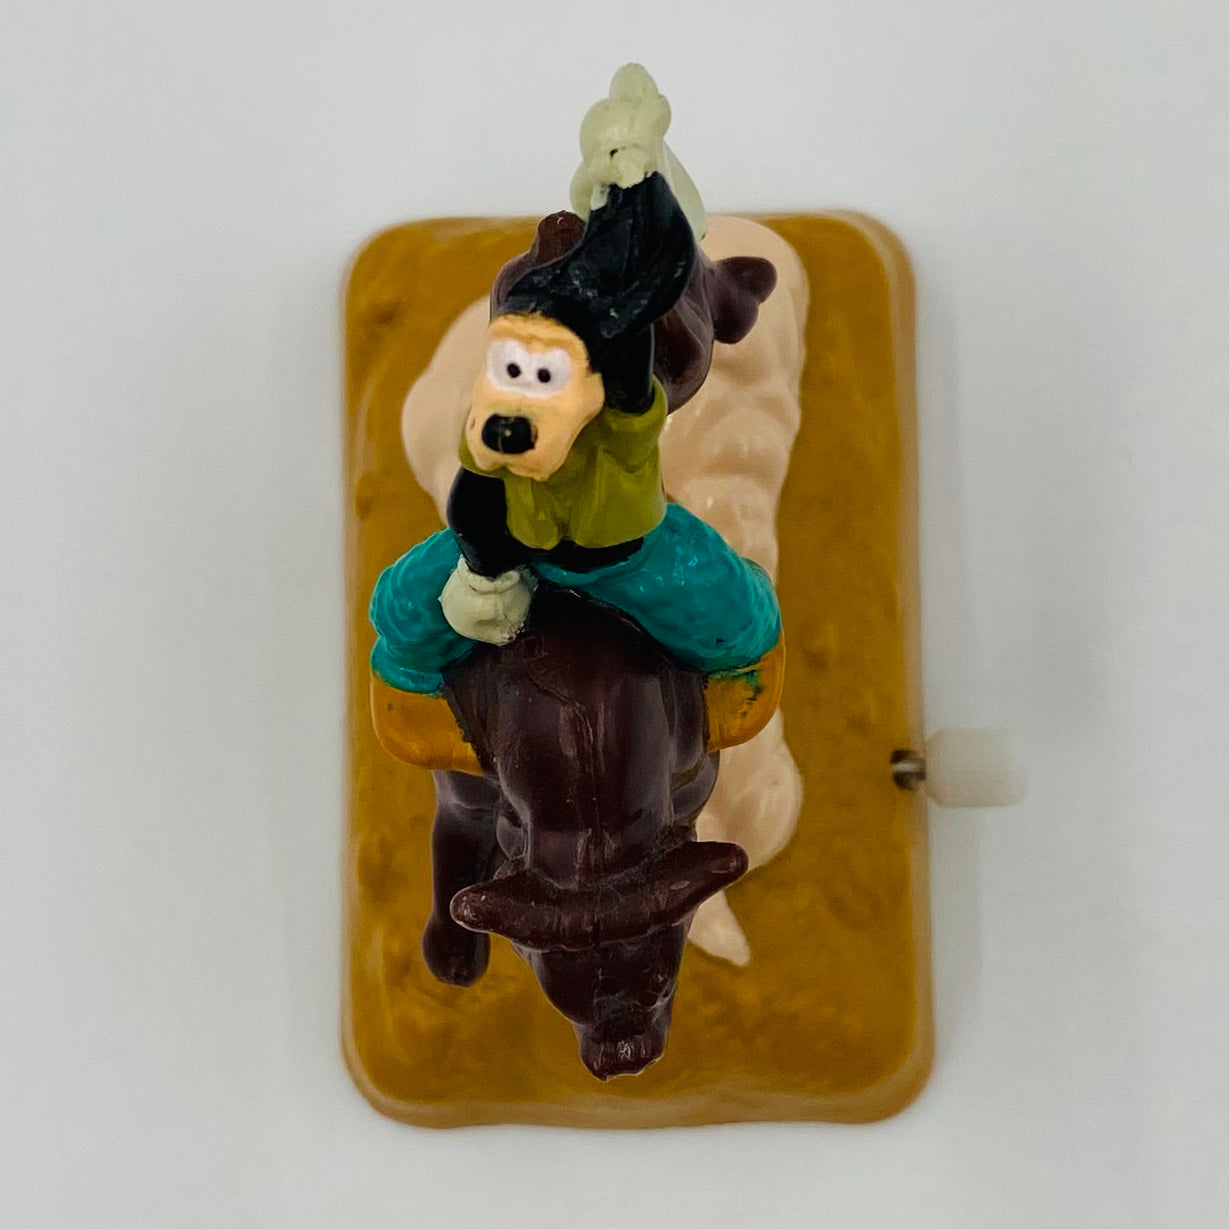 A Goofy Movie Goofy on Bucking Bronco Burger King Kids' Meal toy (1995) loose